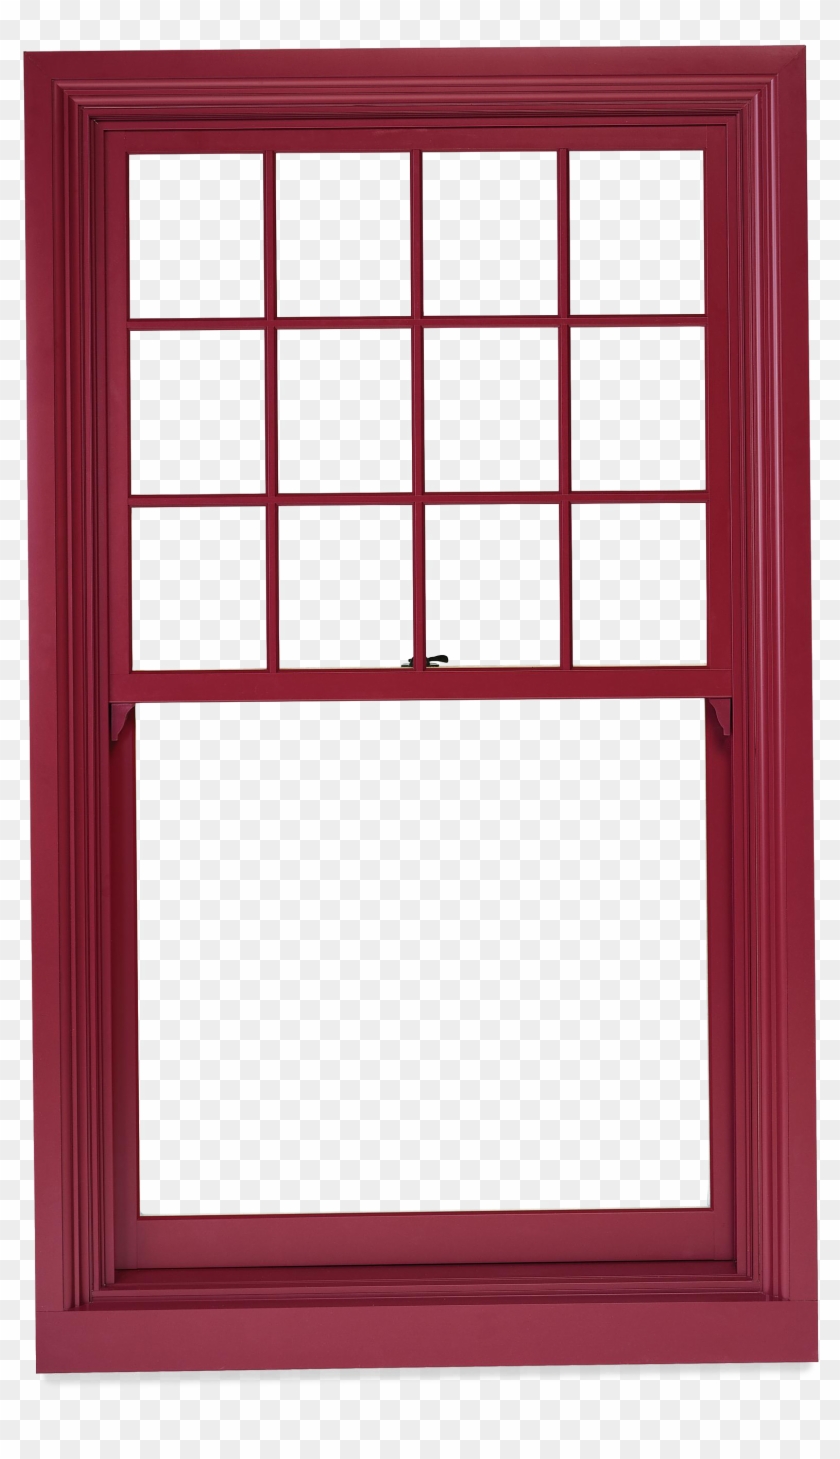 Magnum Double Hung, Marvin Window, Marvin Design Gallery, Clipart #1655871